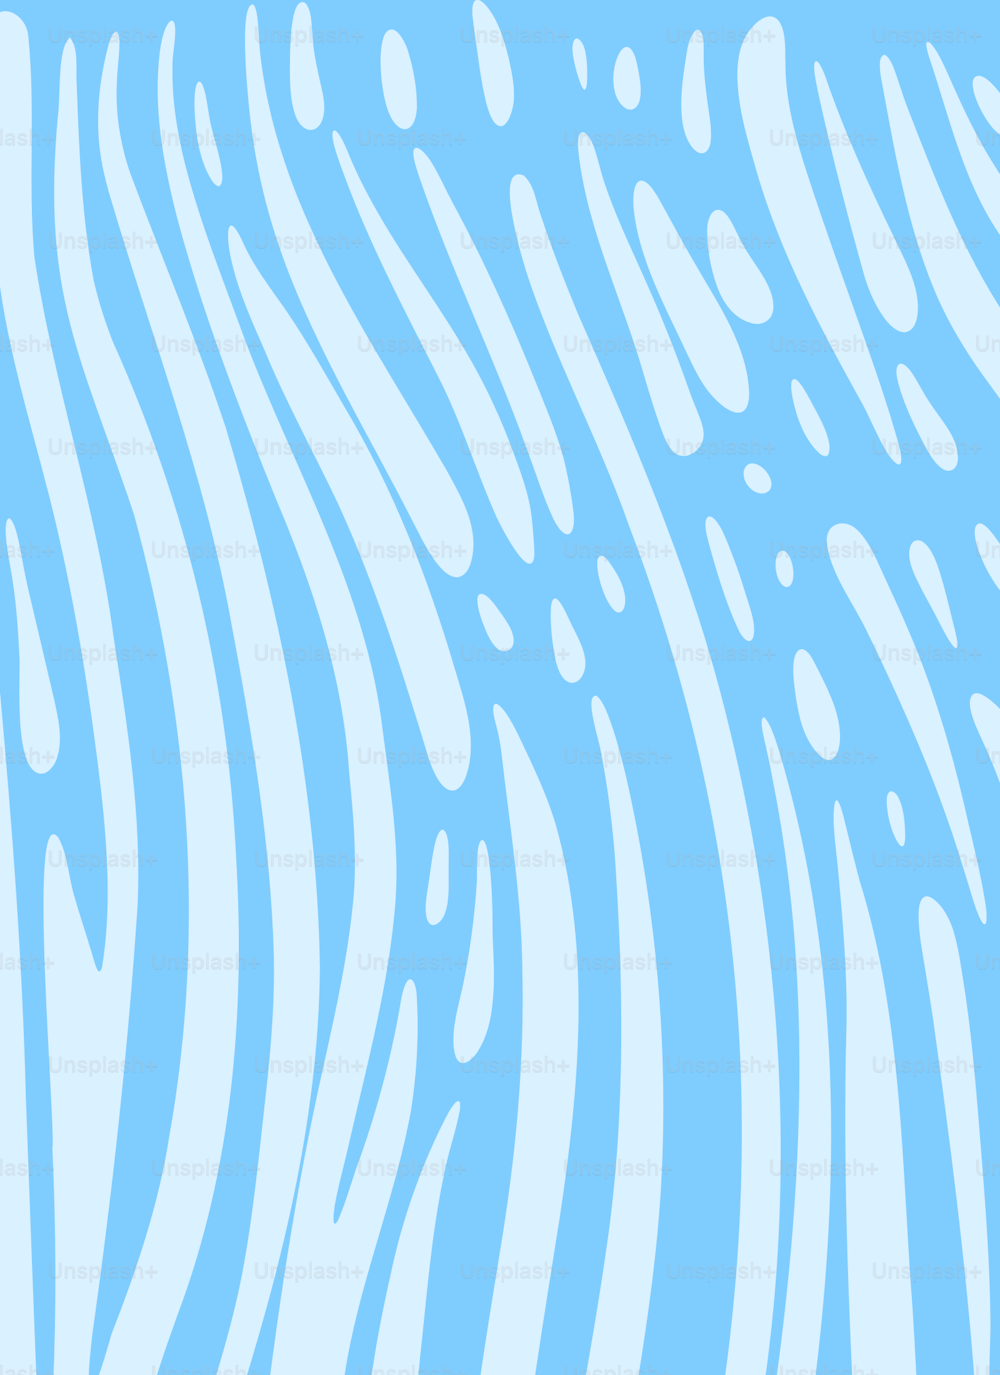 a blue and white background with wavy lines